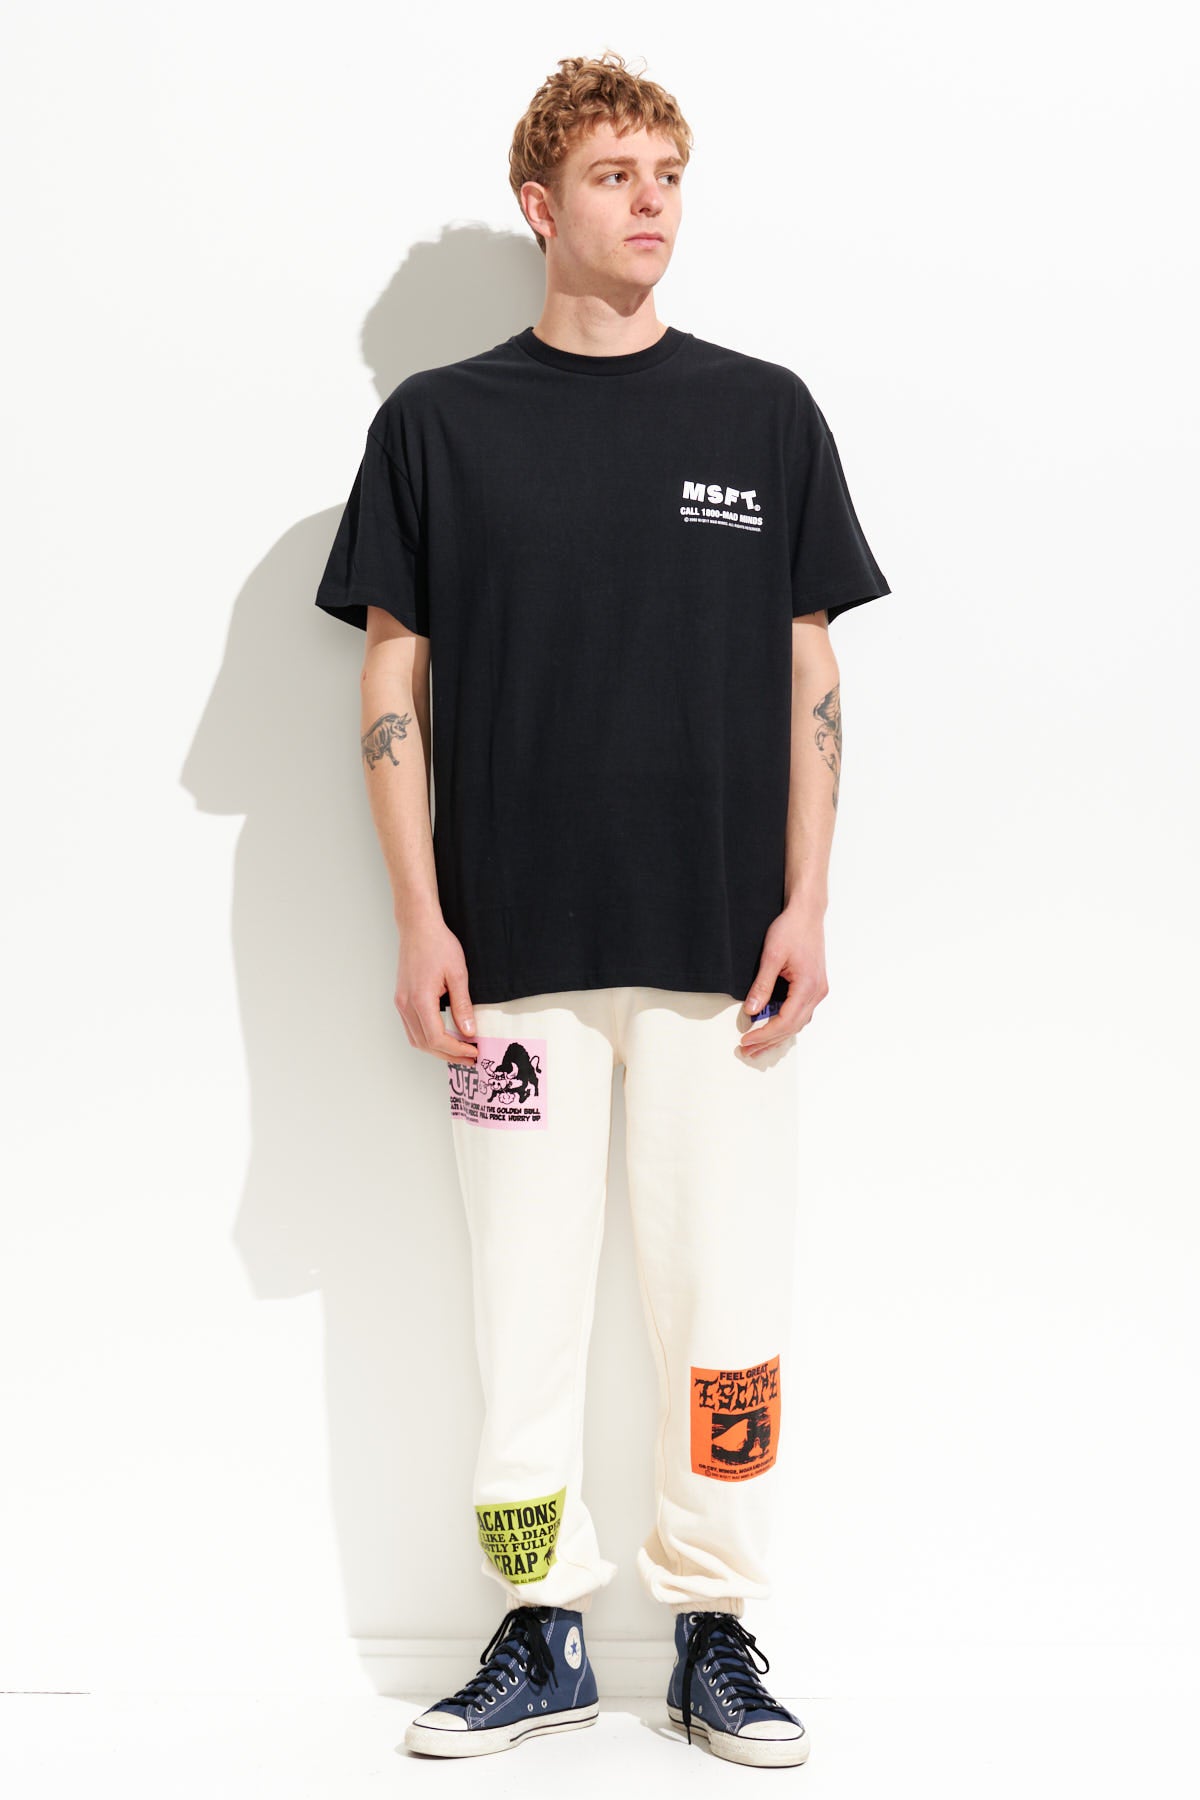 Misfit Shapes - Coast Caller 50/50 Aaa SS Tee - Pitch Black